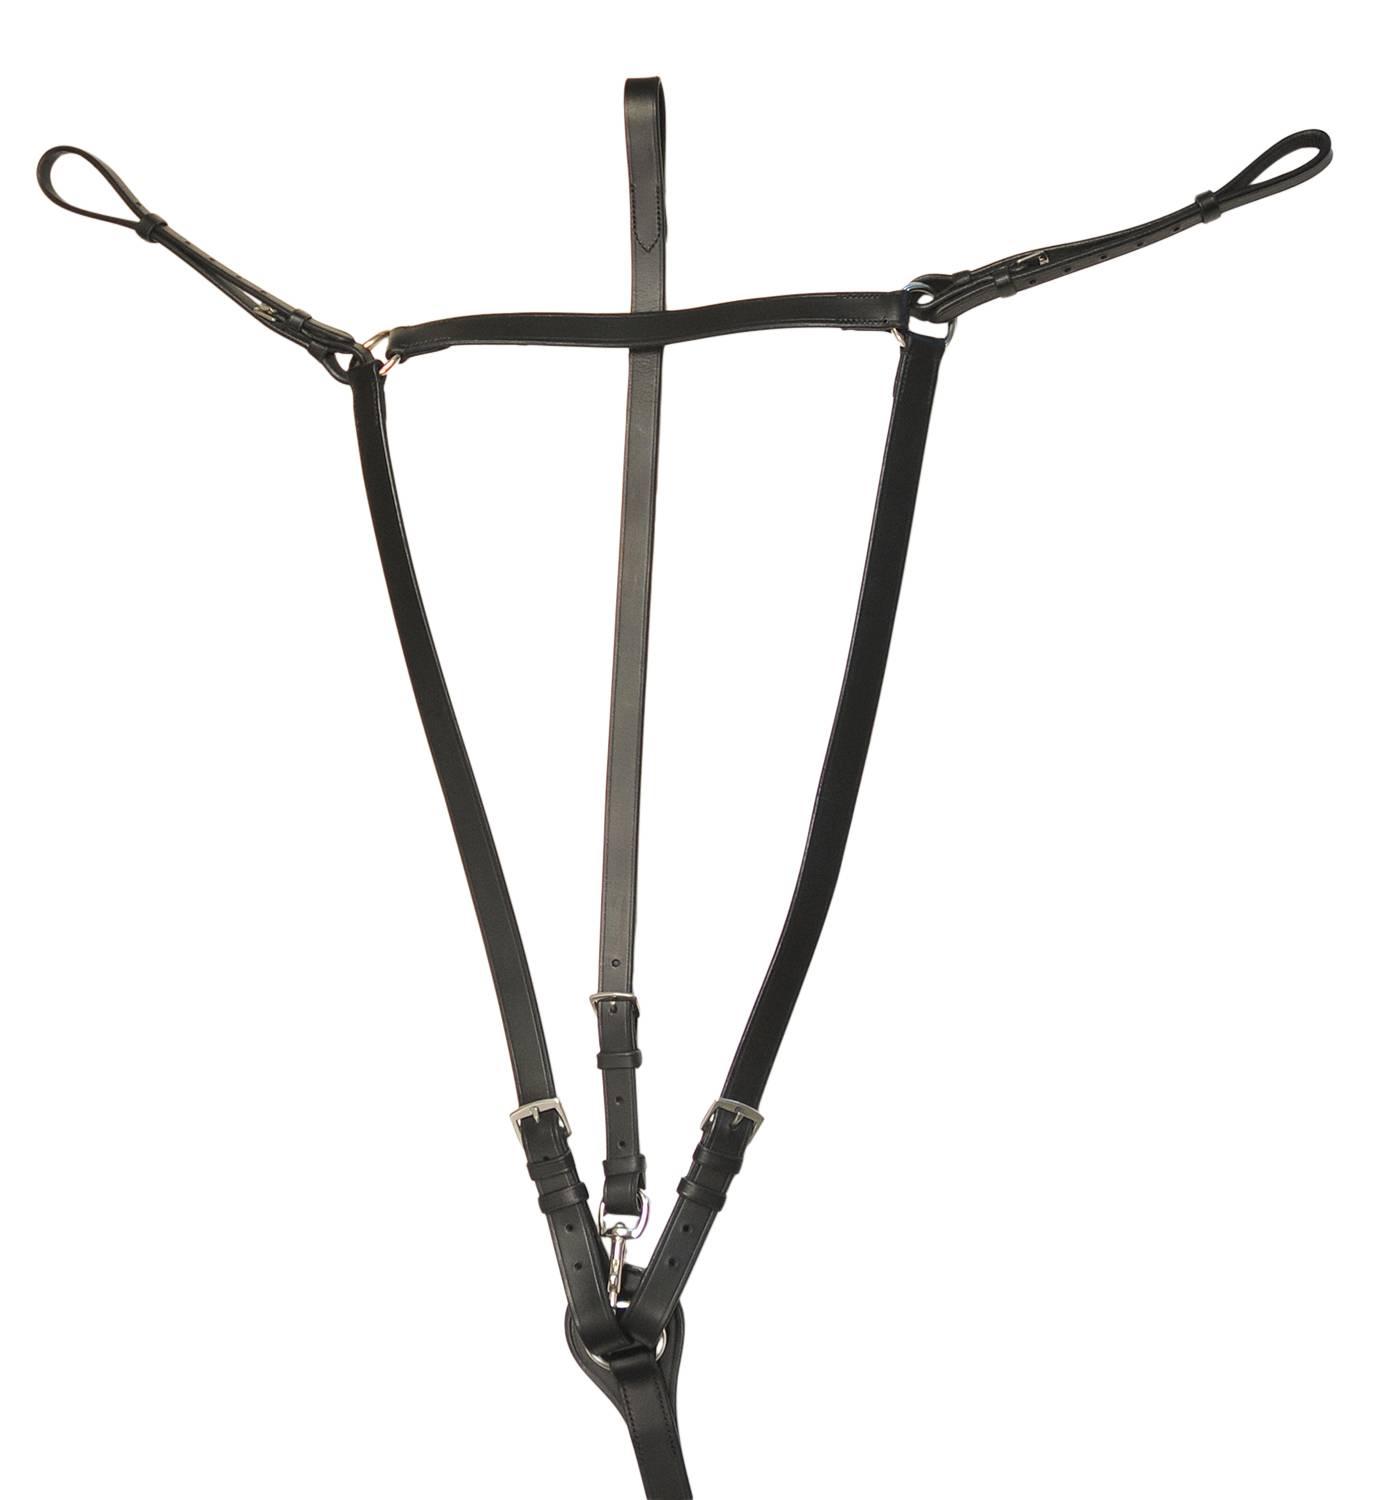 Treadstone Windeck Flat Breastplate with Standing Attachment